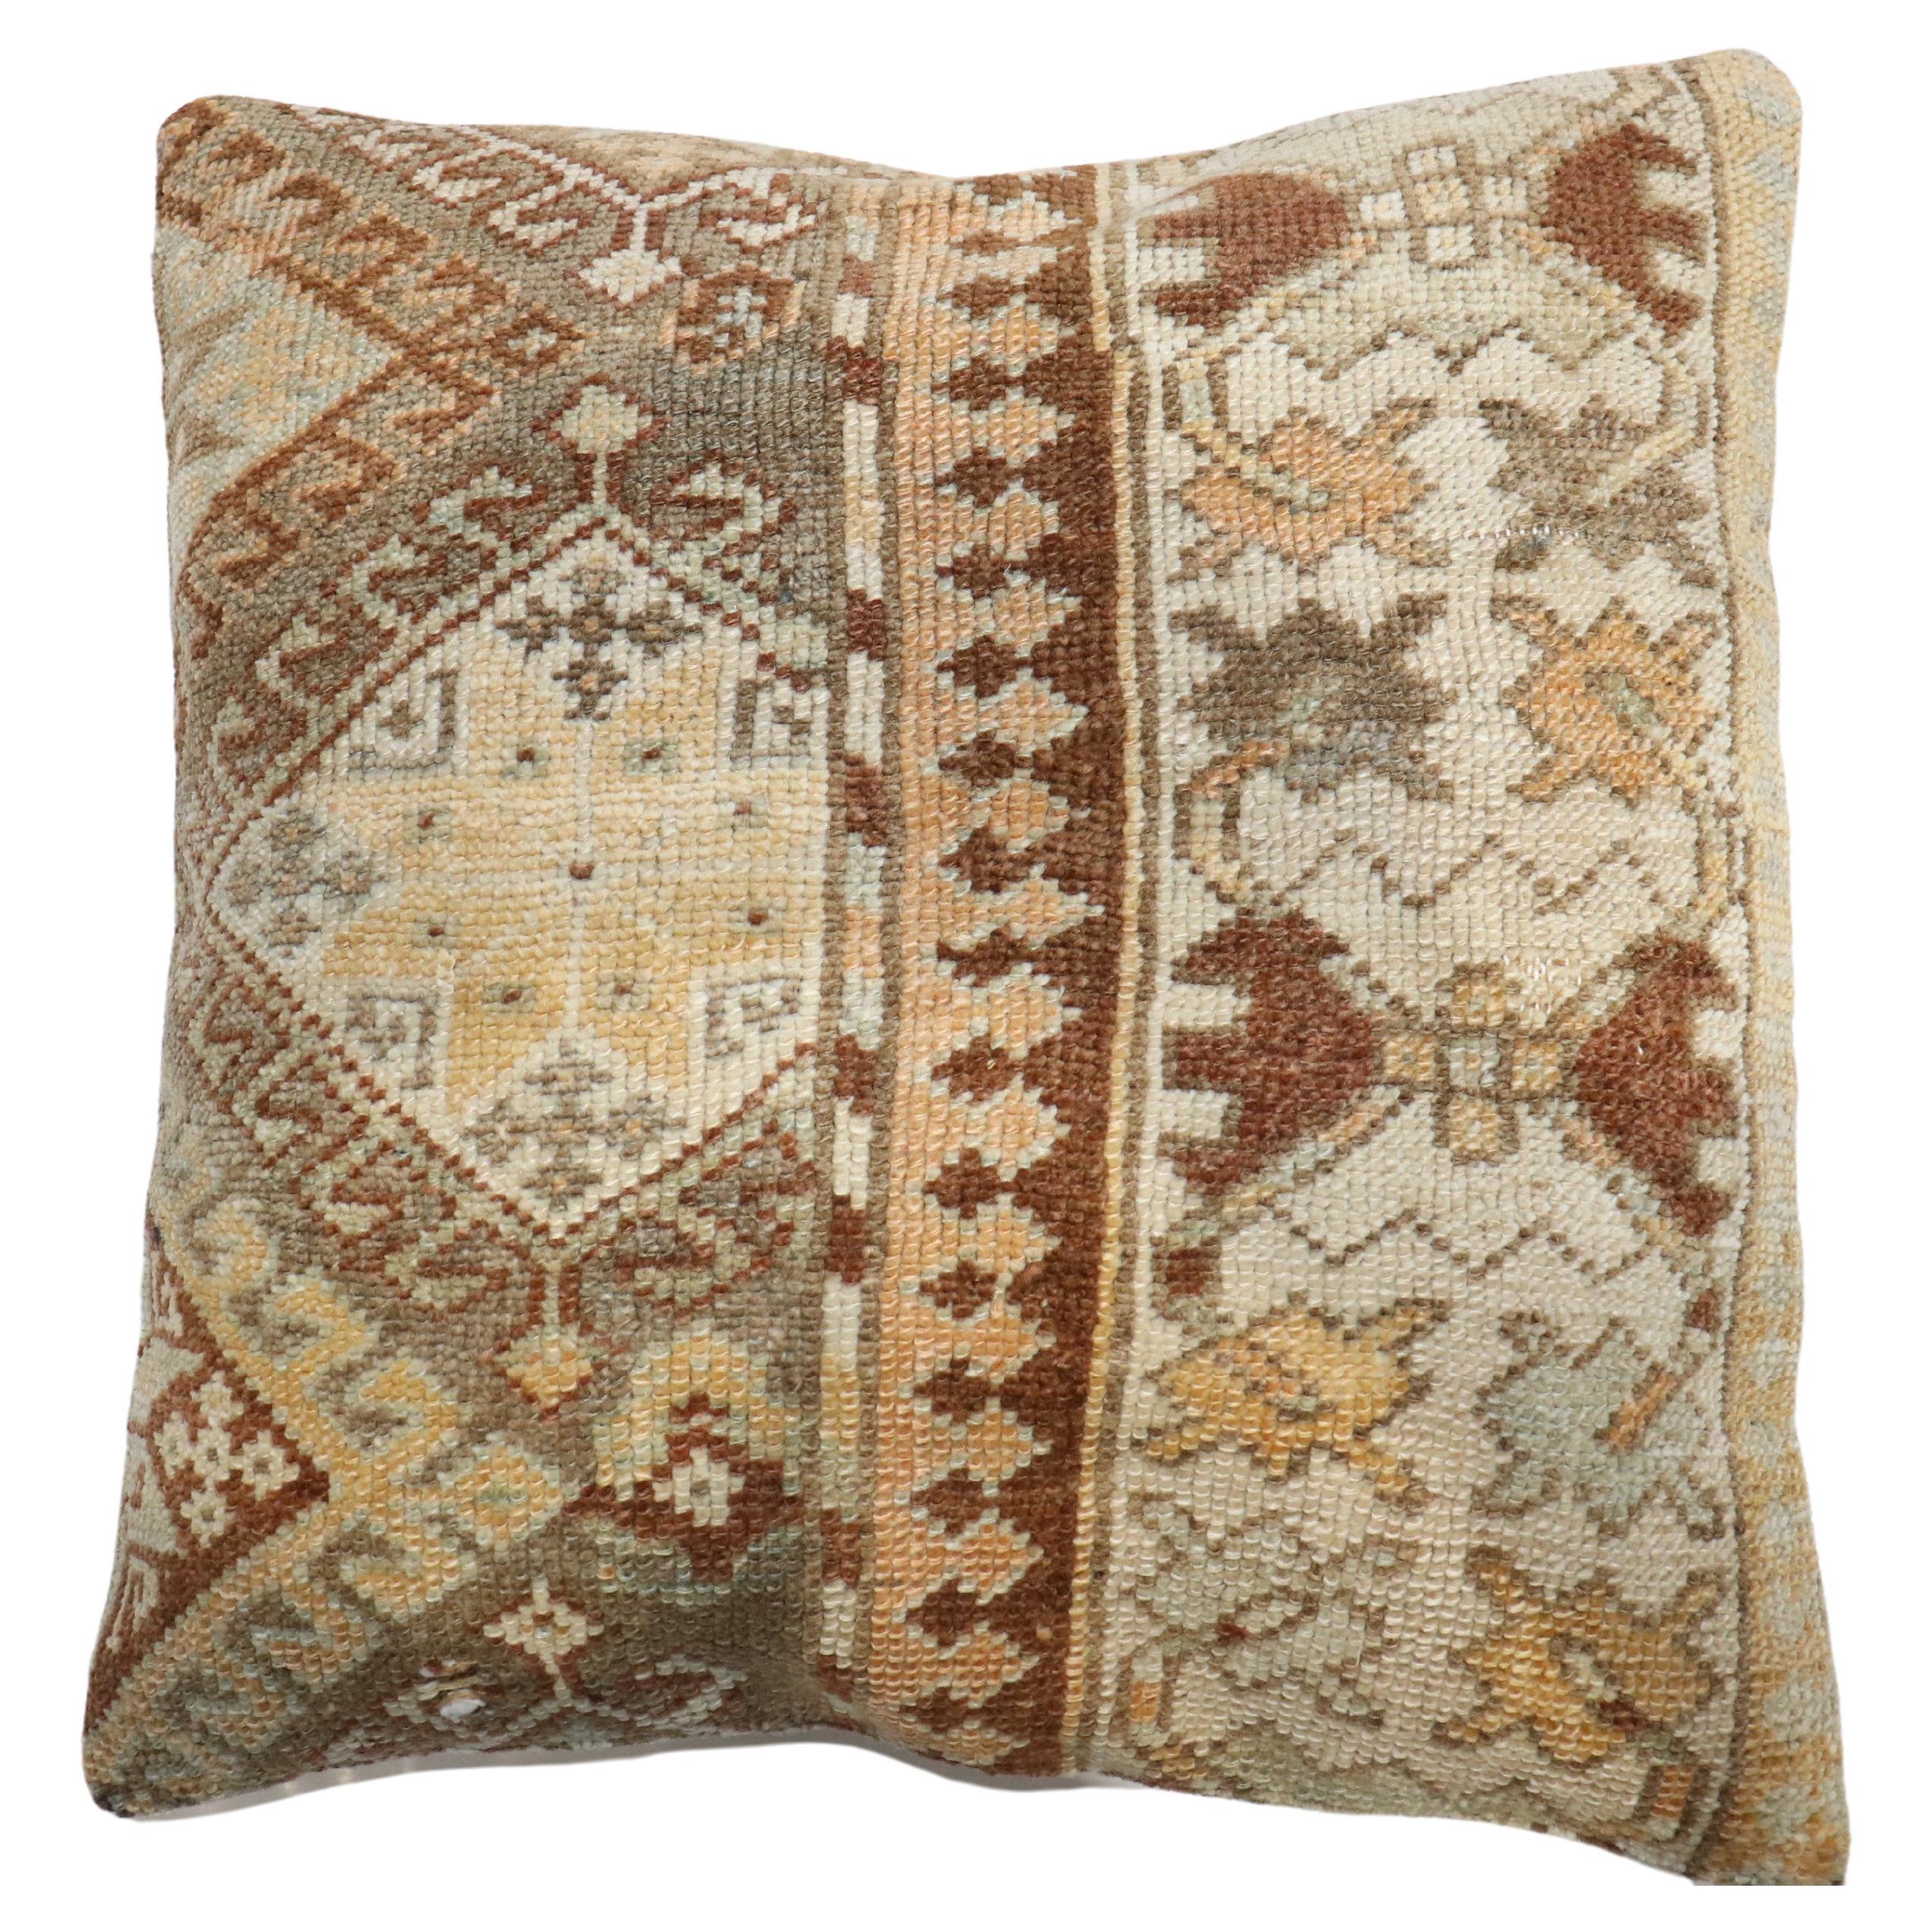 Pillow made from an early 20th-century Antique Persian Kurd Rug . Zipper closure and poly-fill provided.

Measures: 20'' x 20''